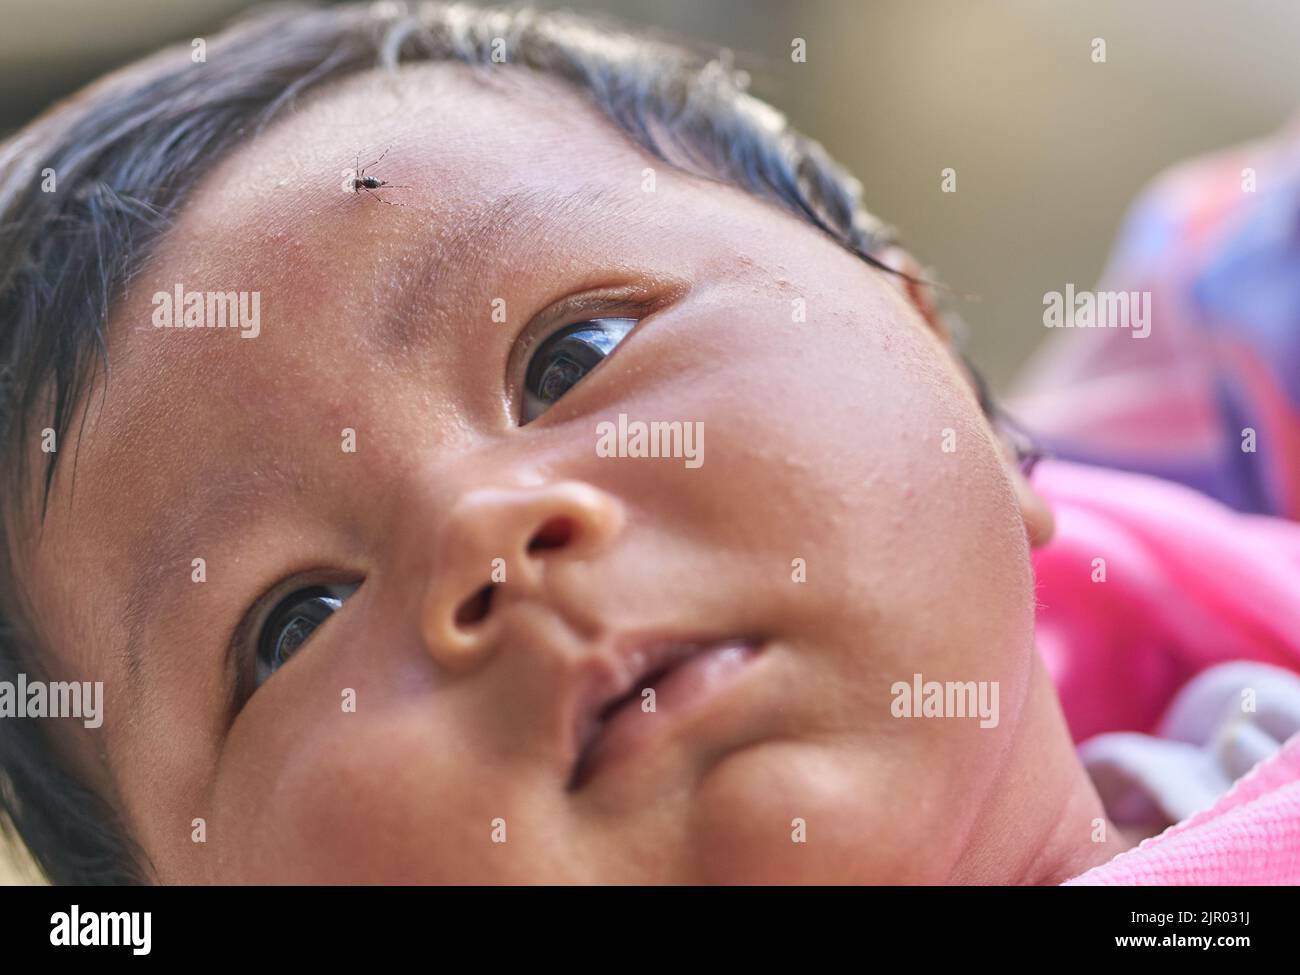 A mosquito on a babys forehead. Stock Photo